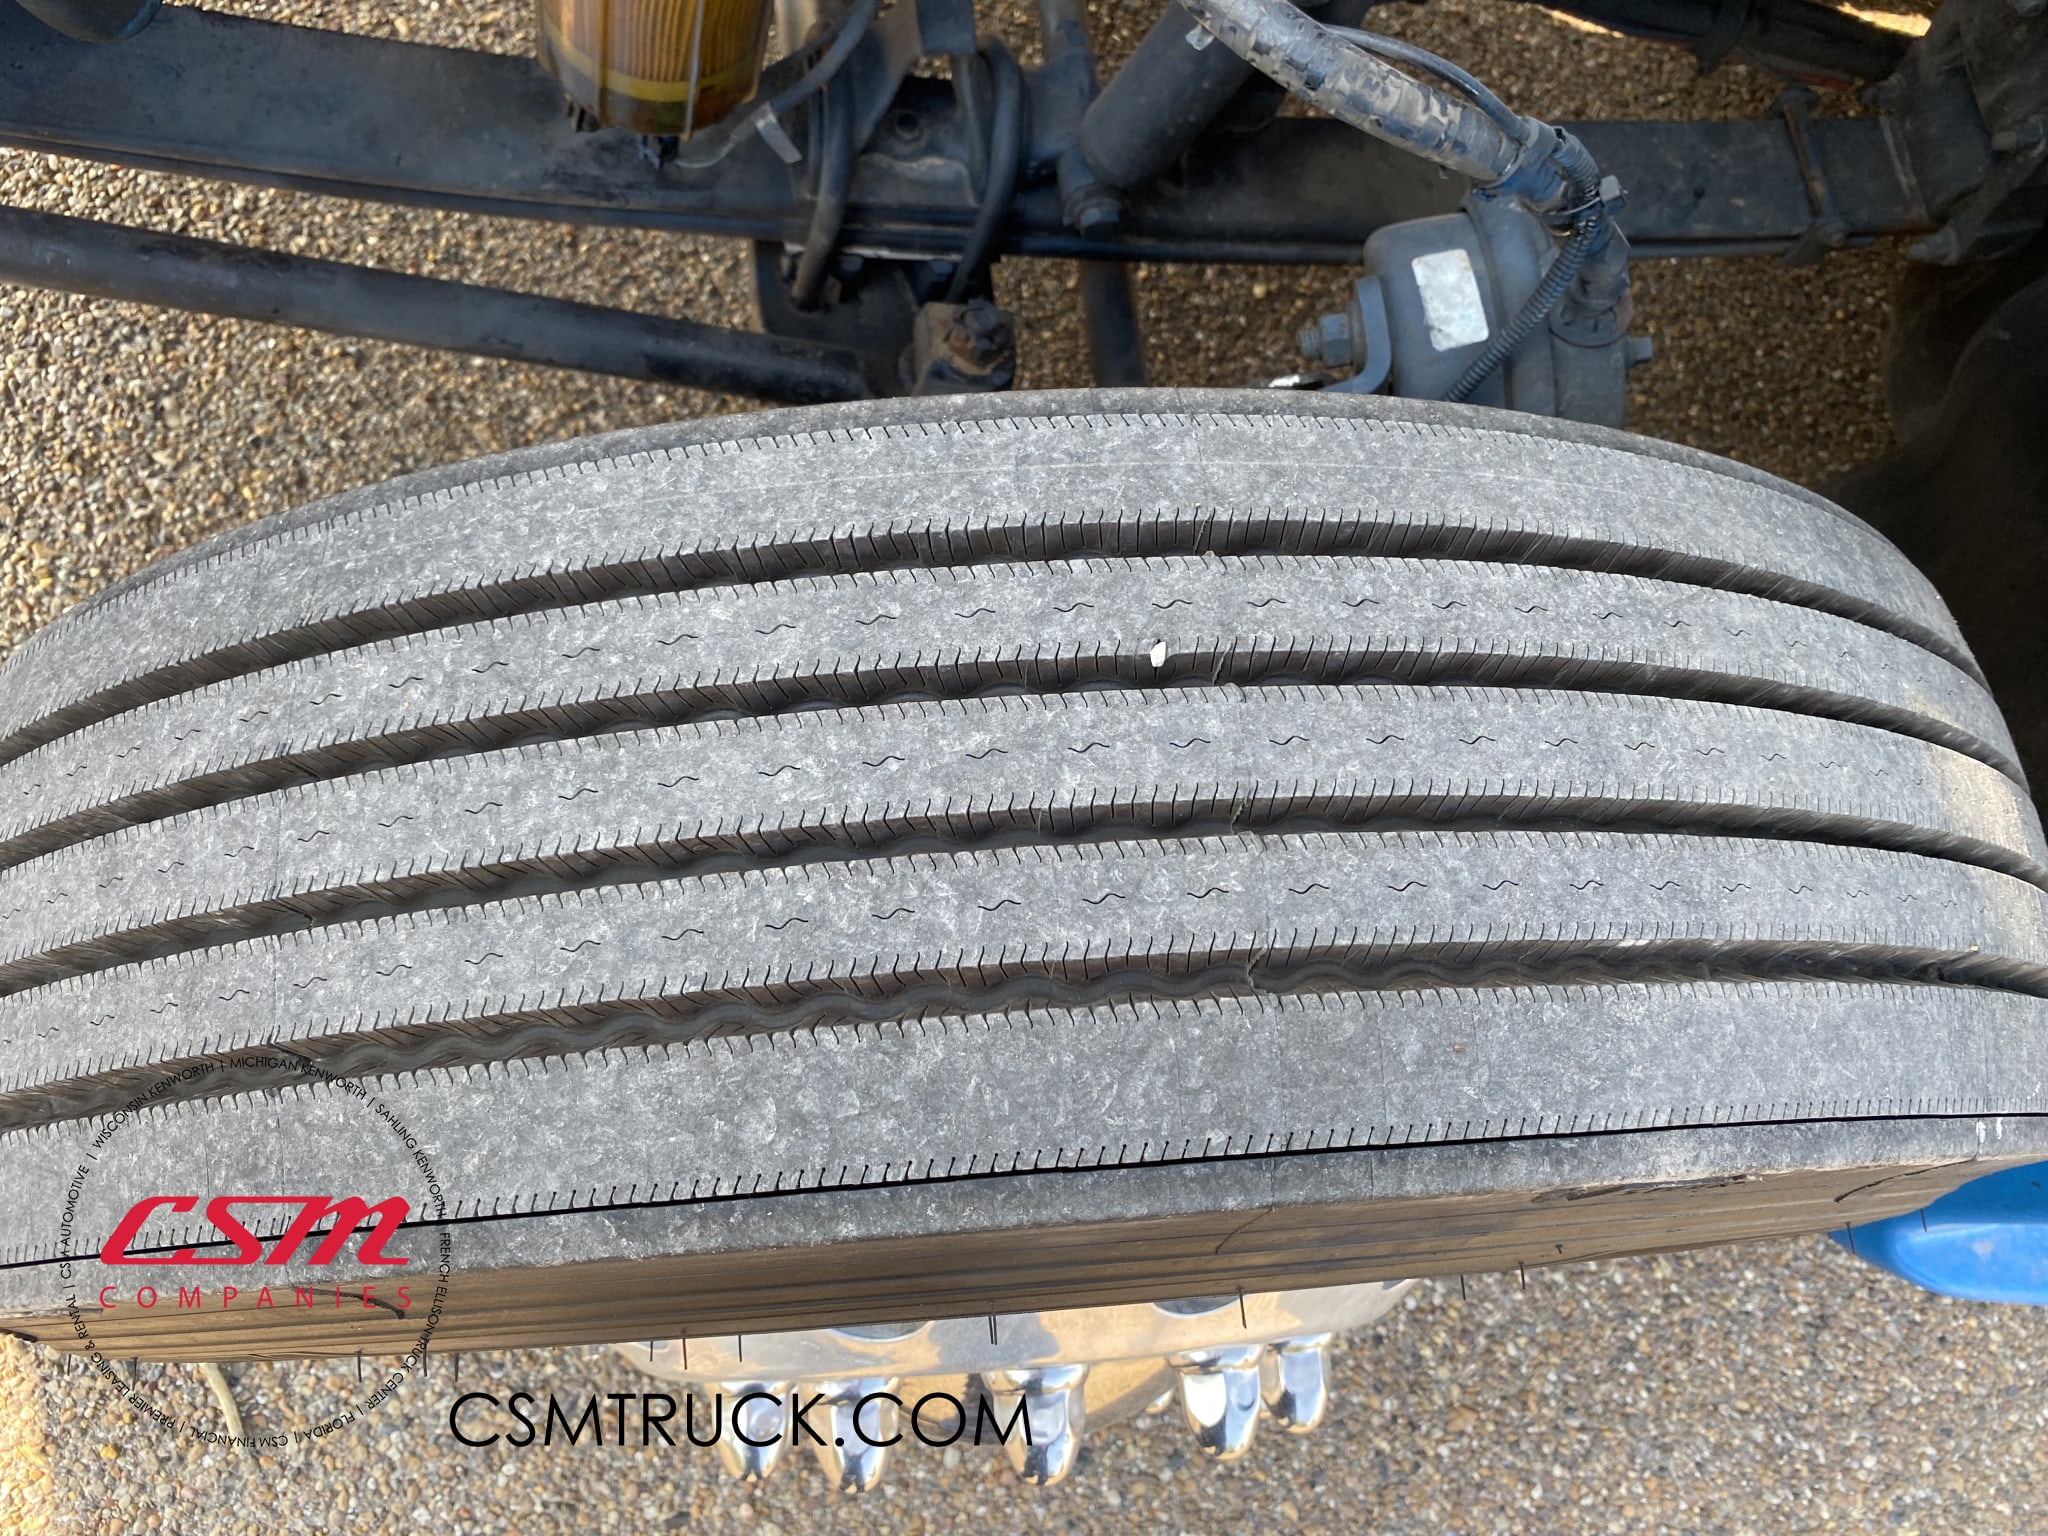 Passenger side front tire tread for this 2020 Kenworth T680 (Stock number: ULJ354455)